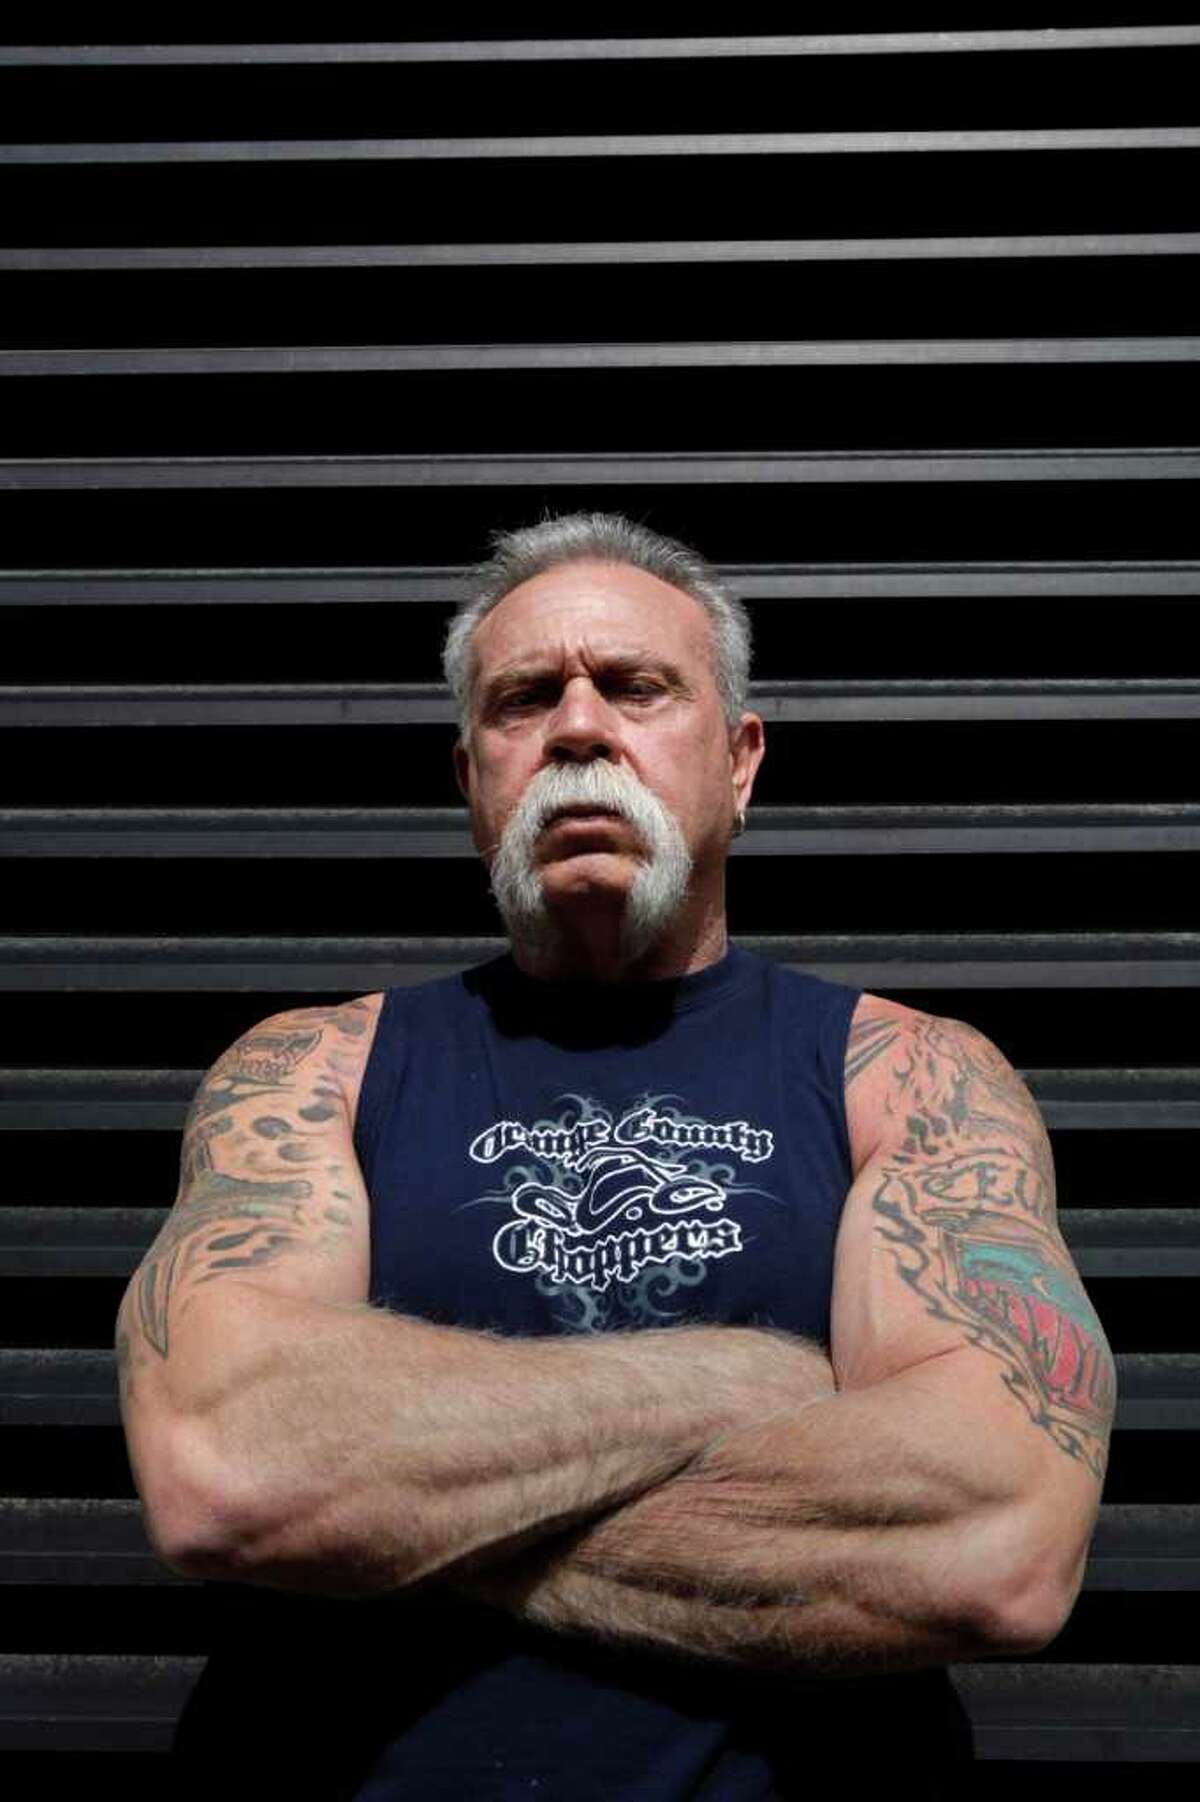 Choppers founder on steroids list